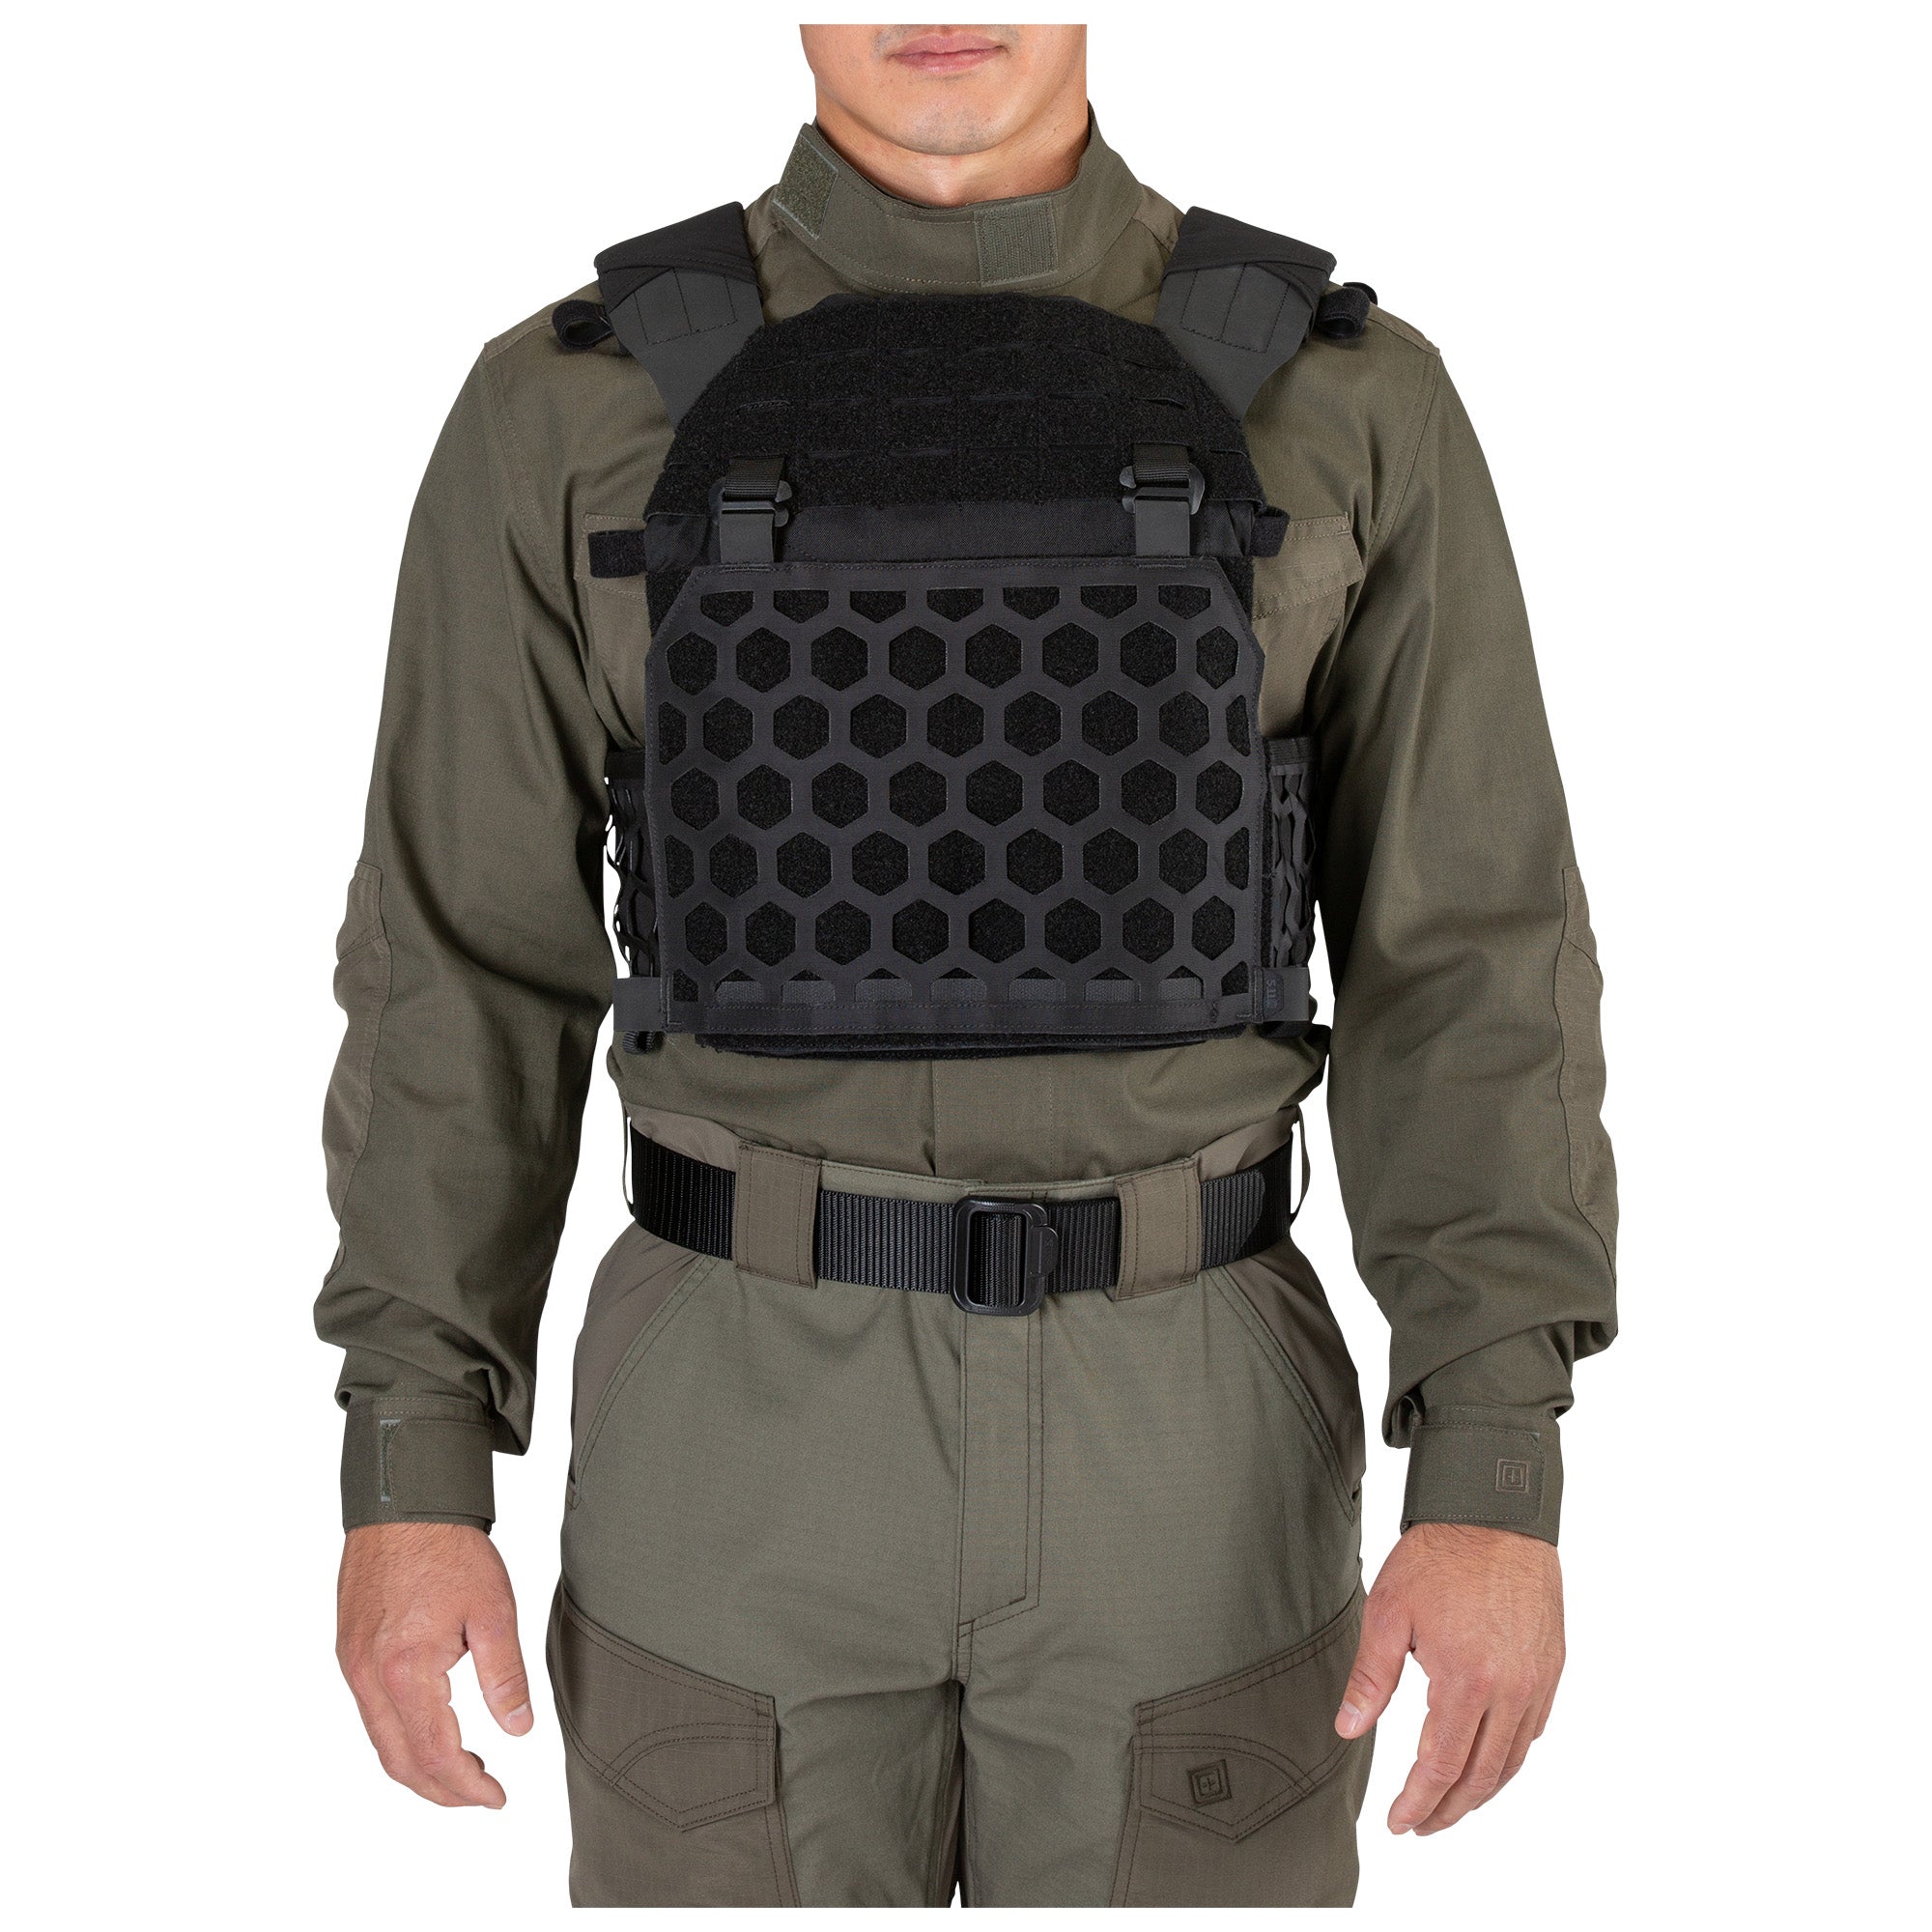 All Mission Plate Carrier